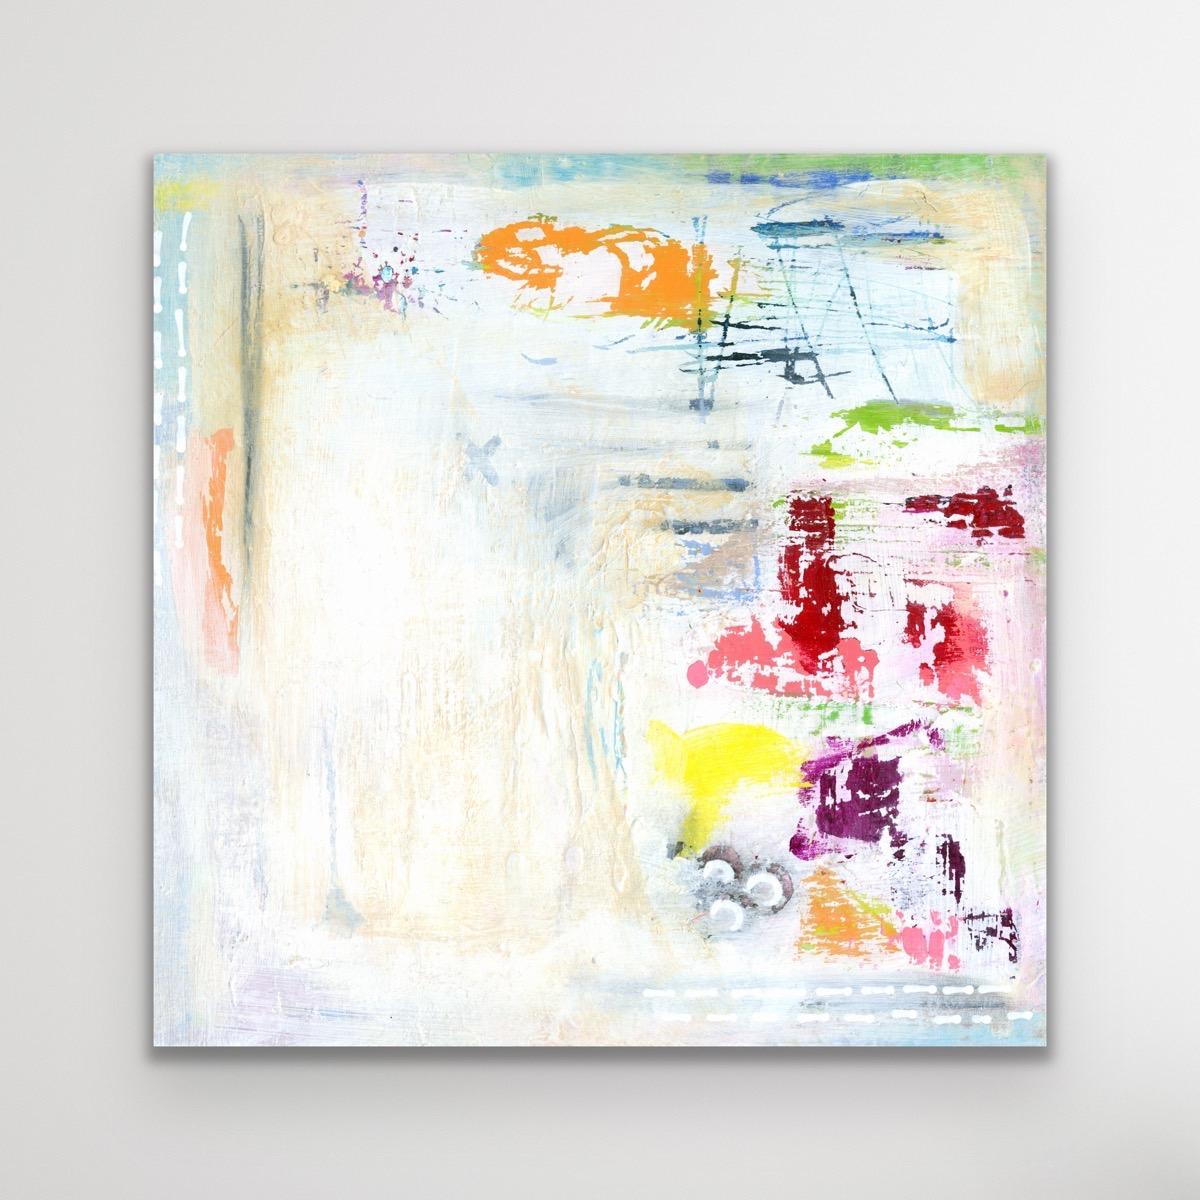 This contemporary modern abstract painting is printed on a lightweight metal composite and comes ready to hang. This vibrant composition can be hung both indoor and outdoor as it is weather resistant.

-Title: Kline
-Artist: Celeste Reiter
-Limited